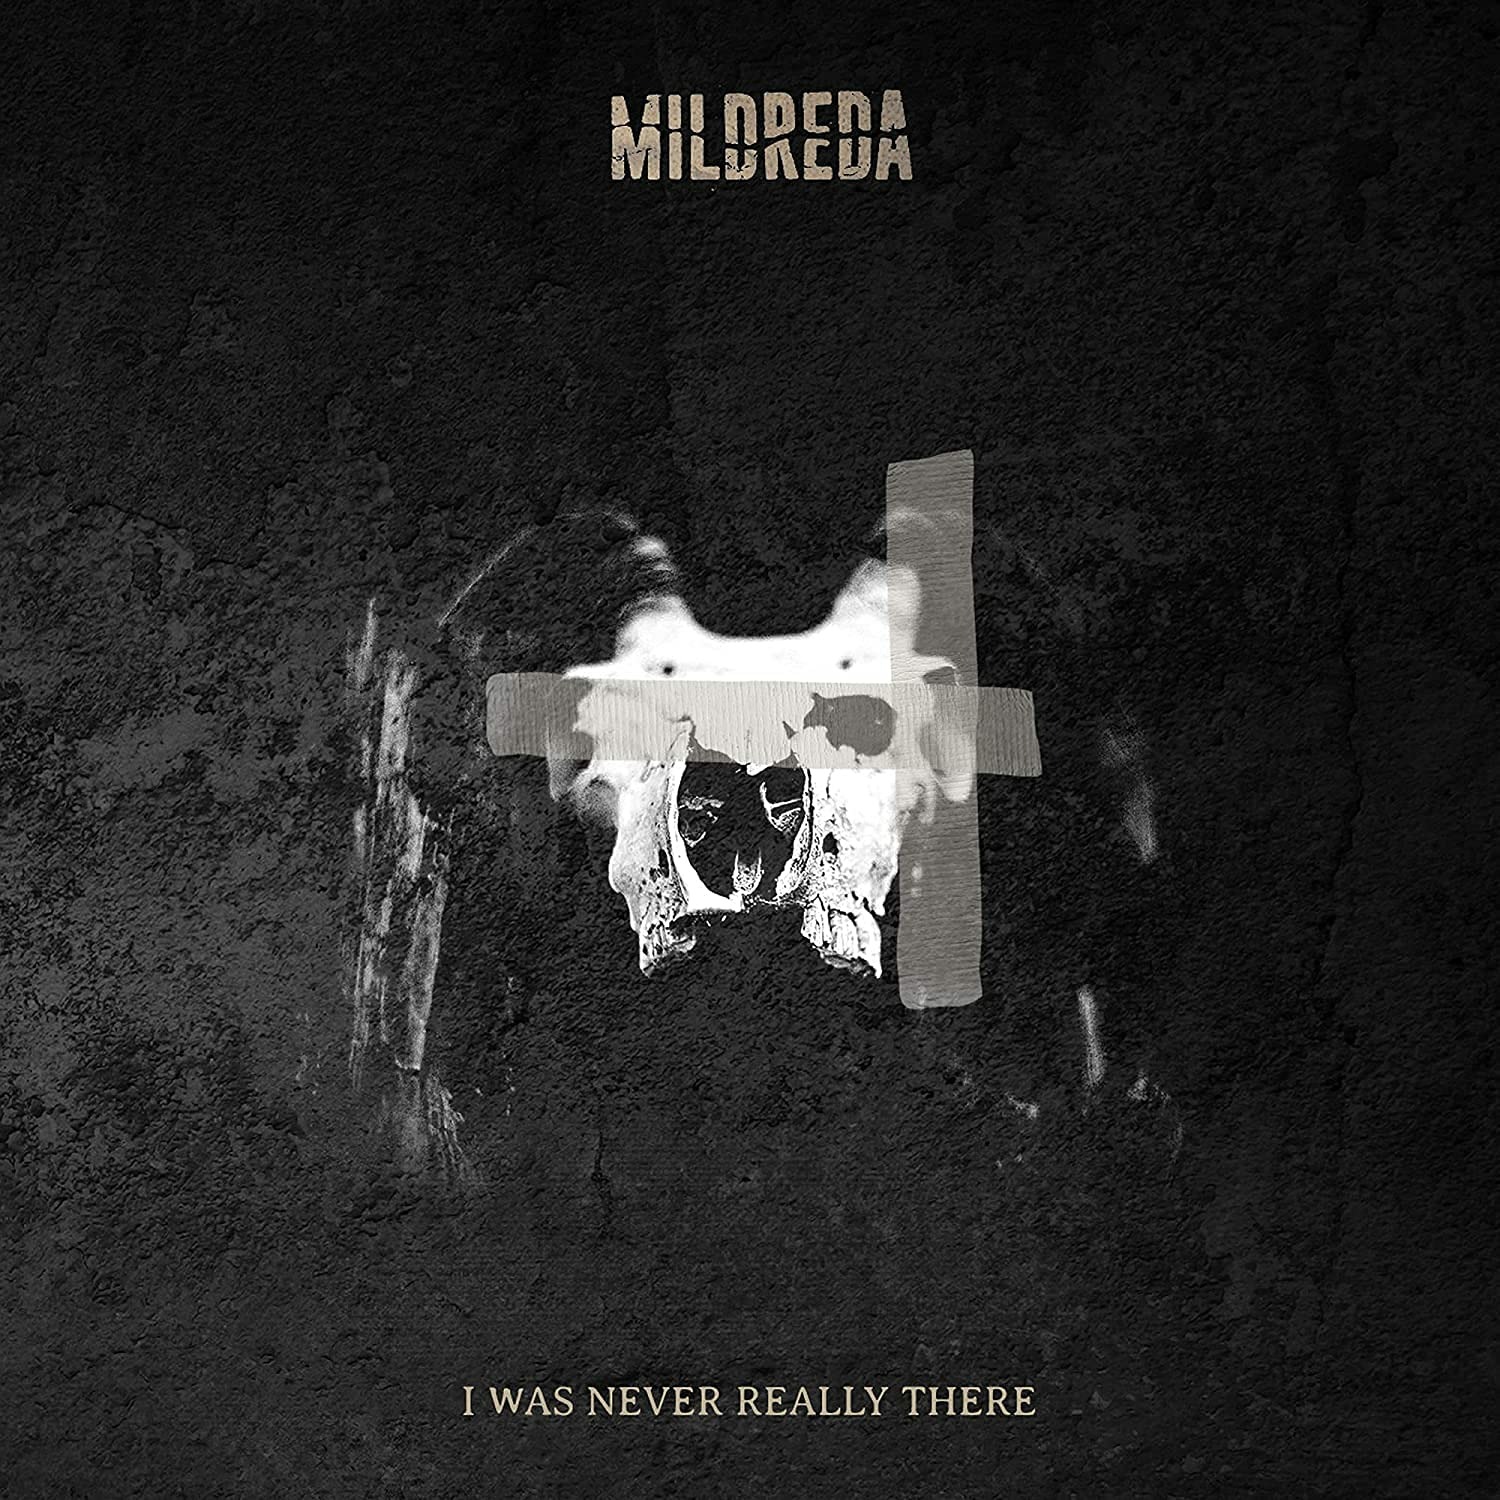 MILDREDA - I WAS NEVER REALLY THERE, CD